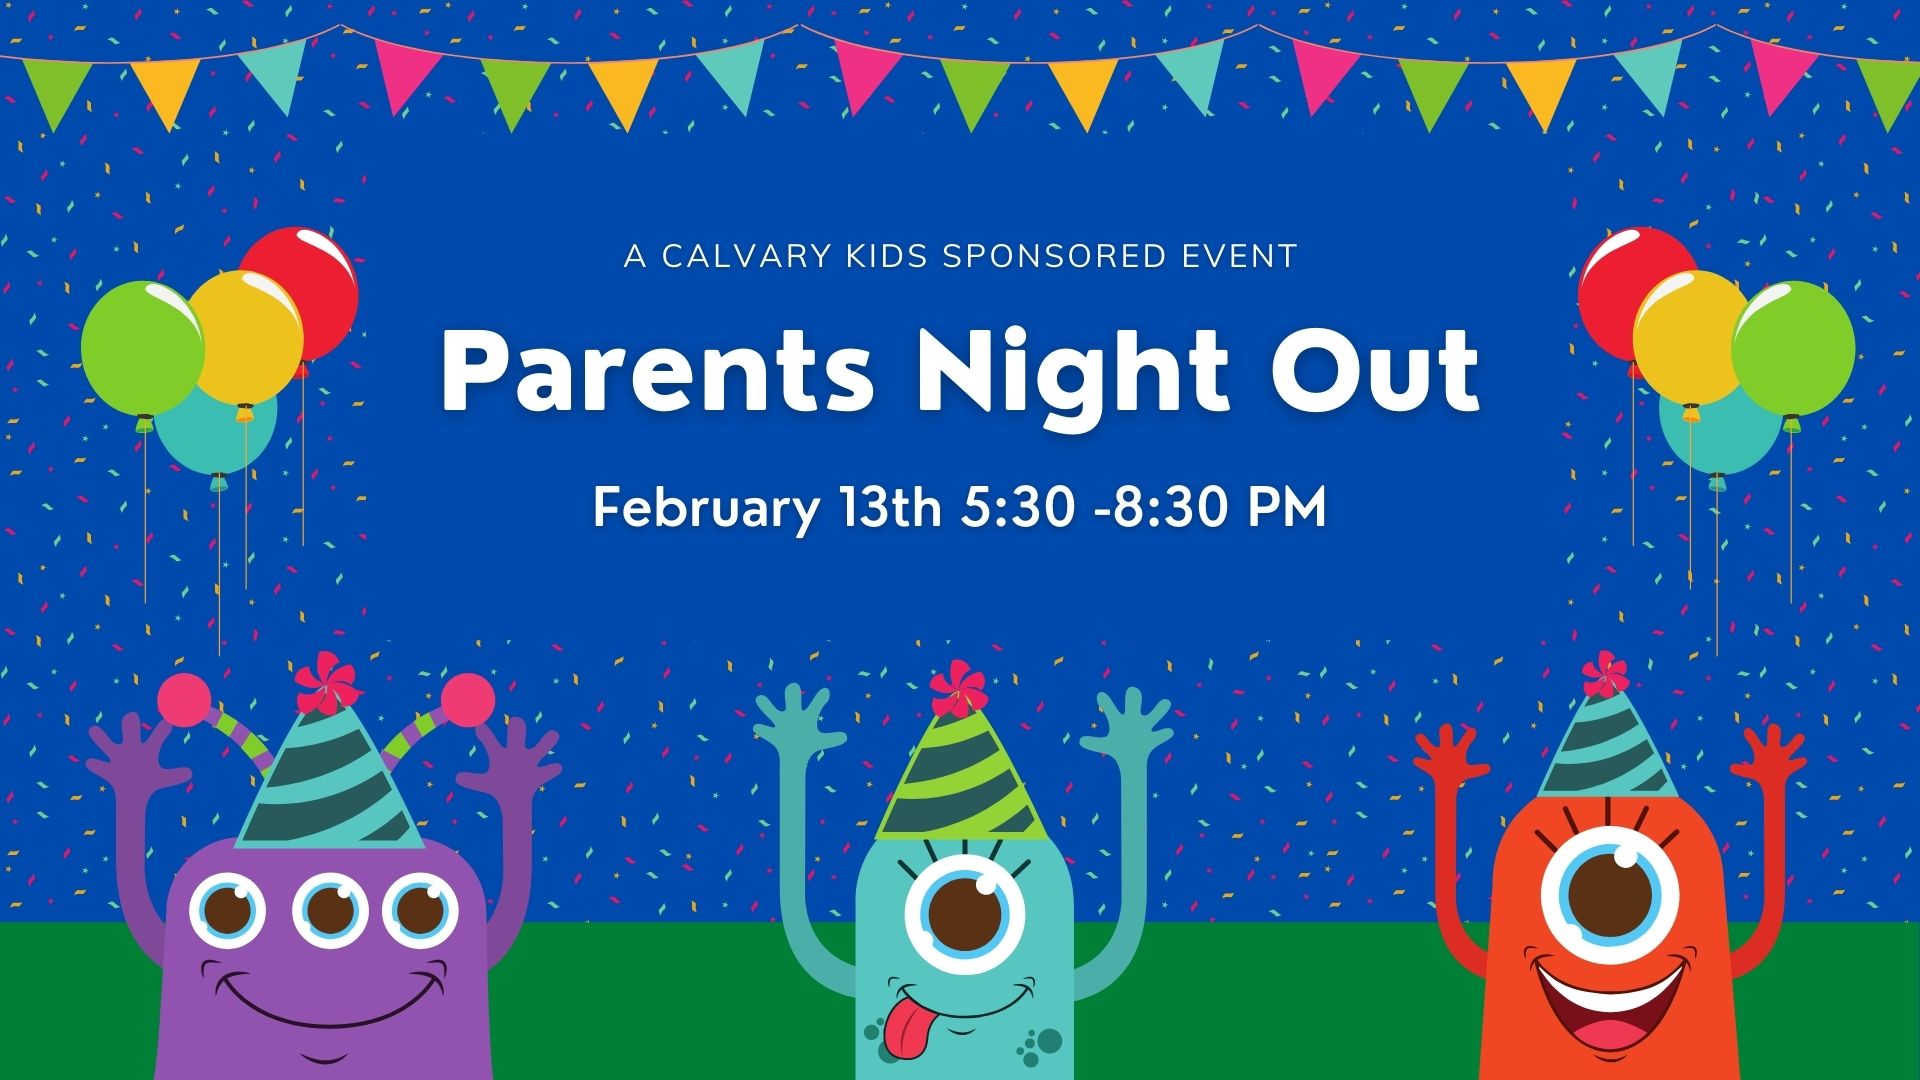 Parents Night Out Feb 13th at 5:30 PM